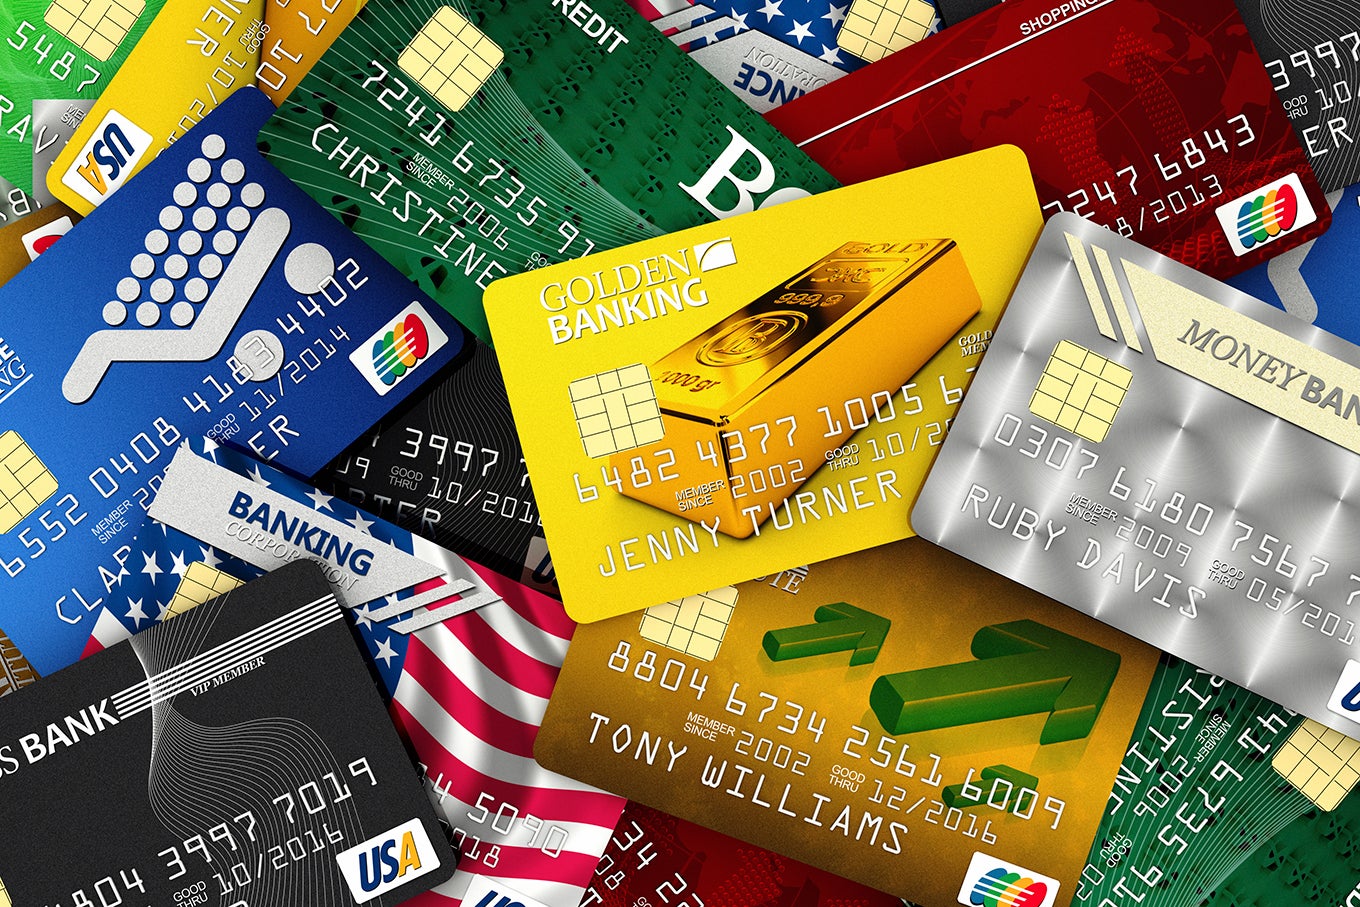 New Credit Card Accounts Up 21% Year Over Year | Credit.com